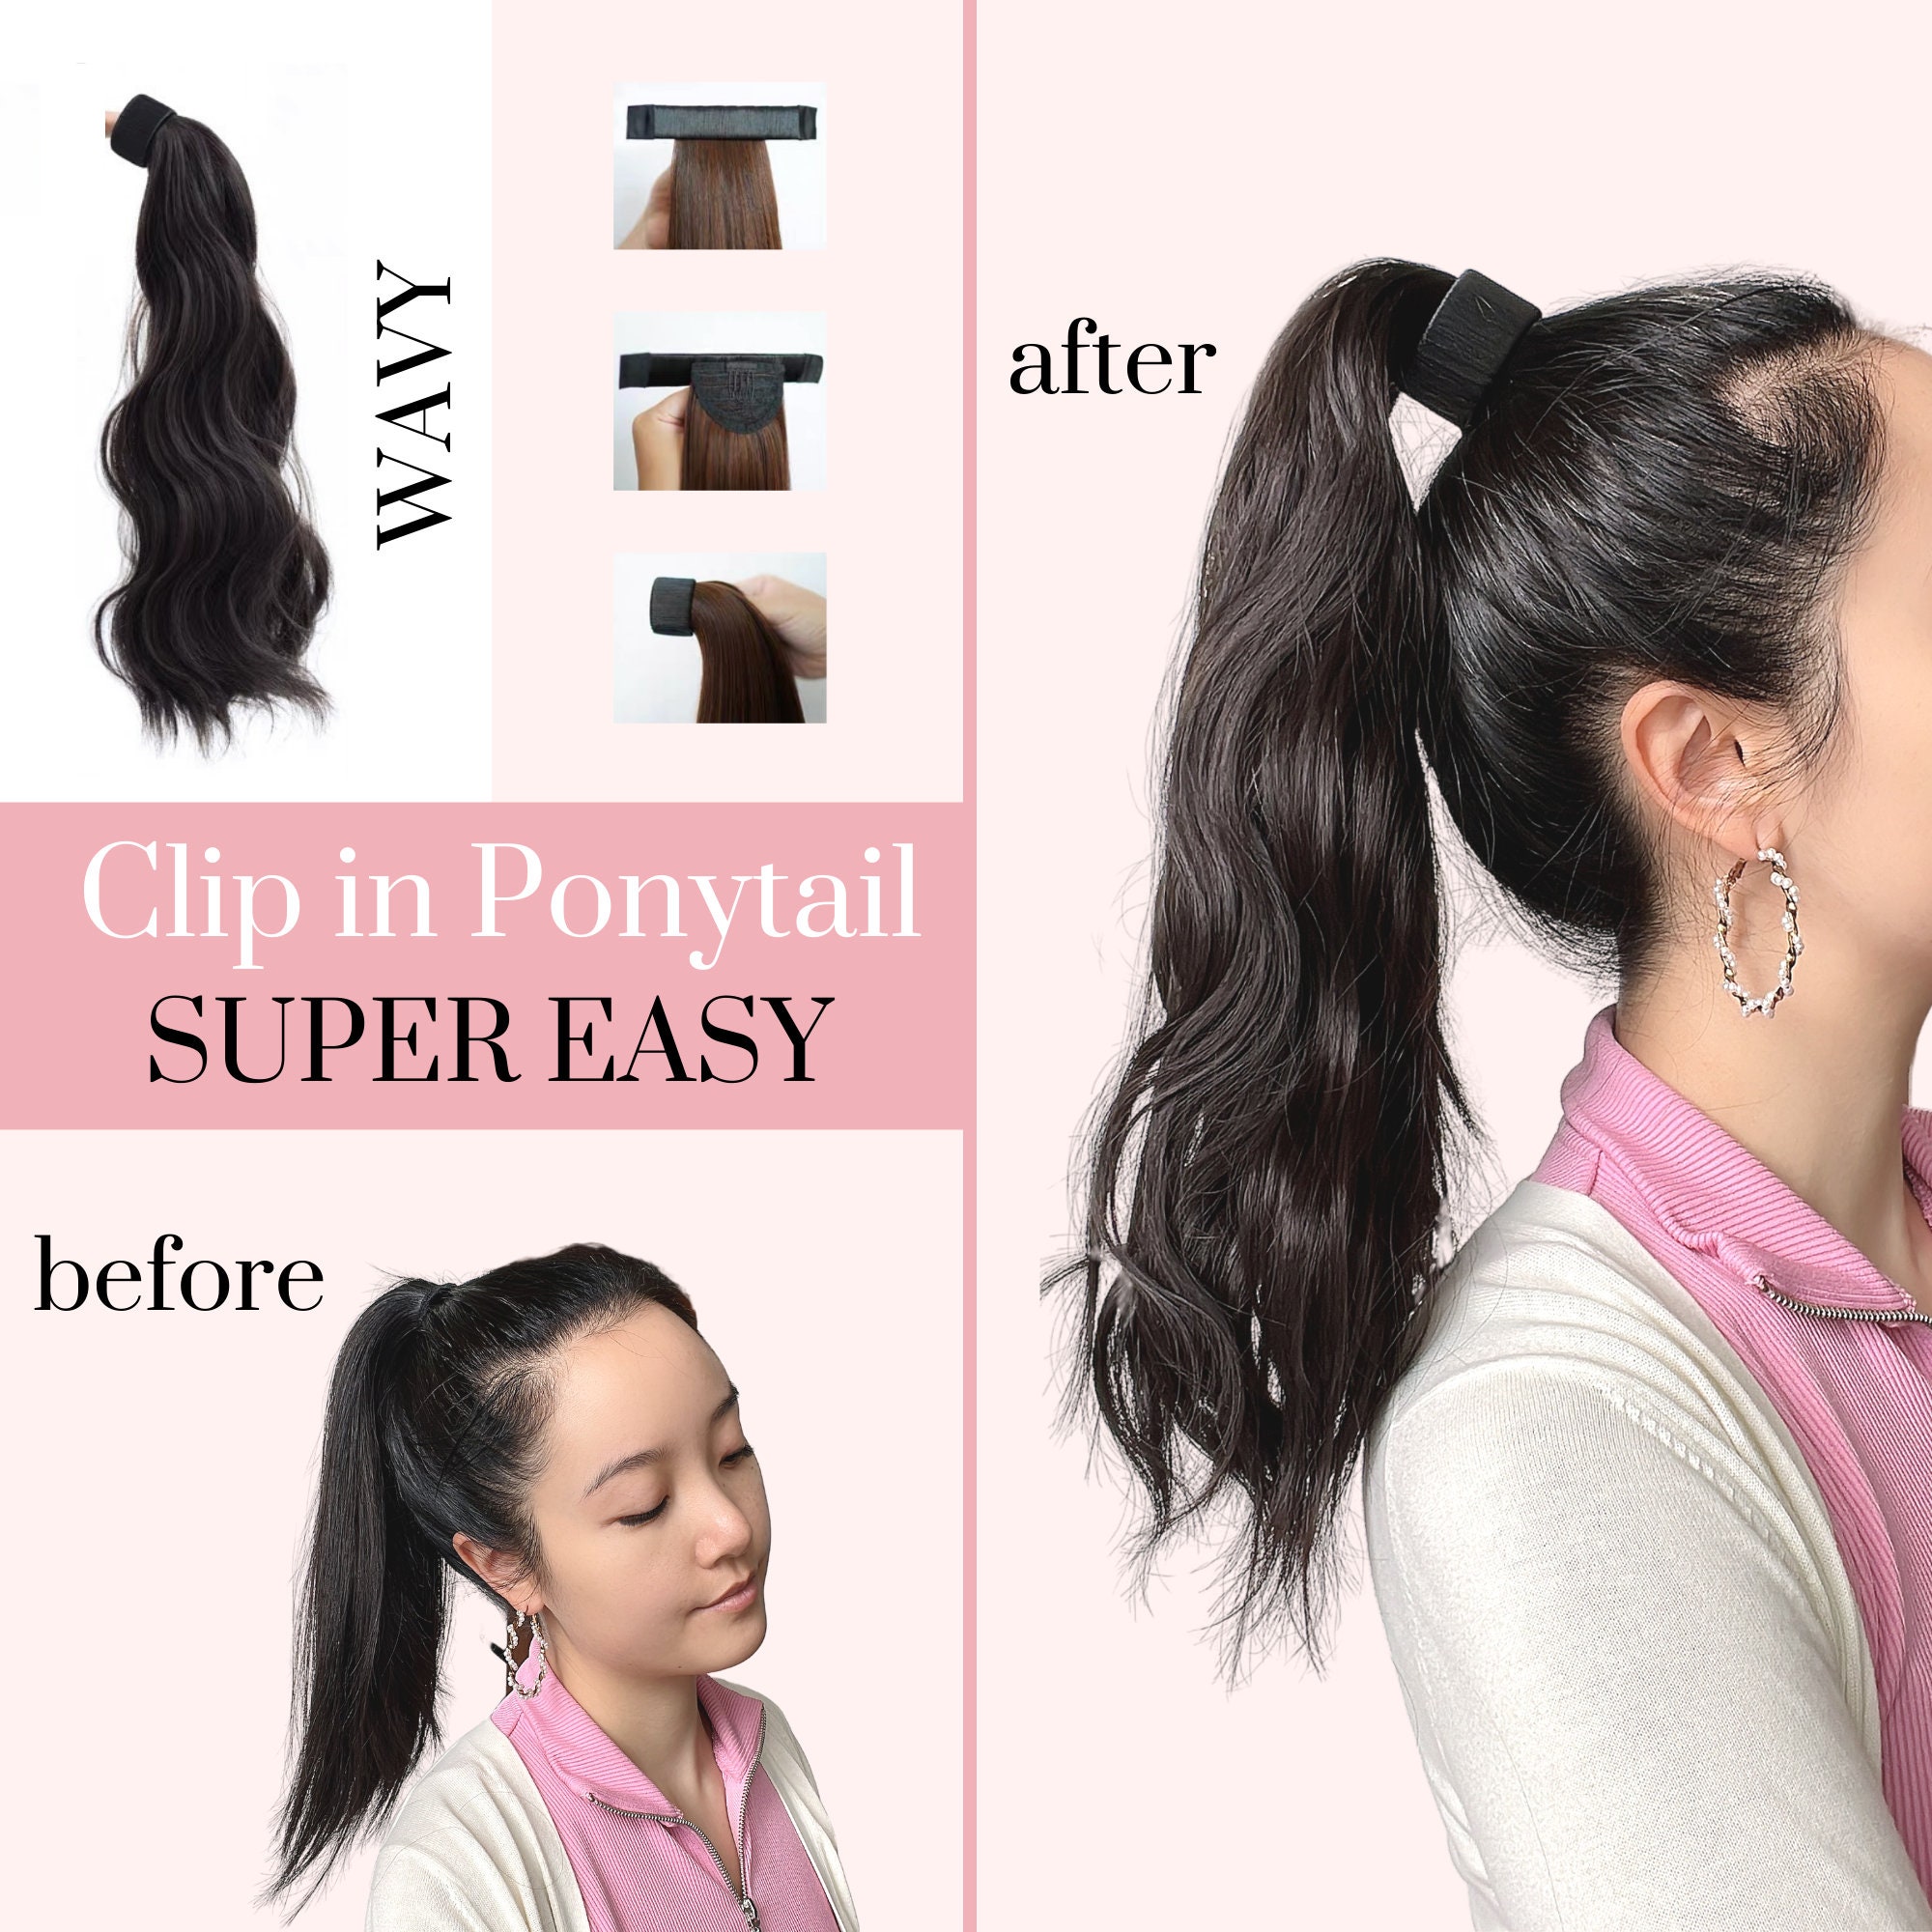 SNAP Clip in Ponytail wavy Hair Super Easy Clip in Ponytail - Etsy Hong Kong